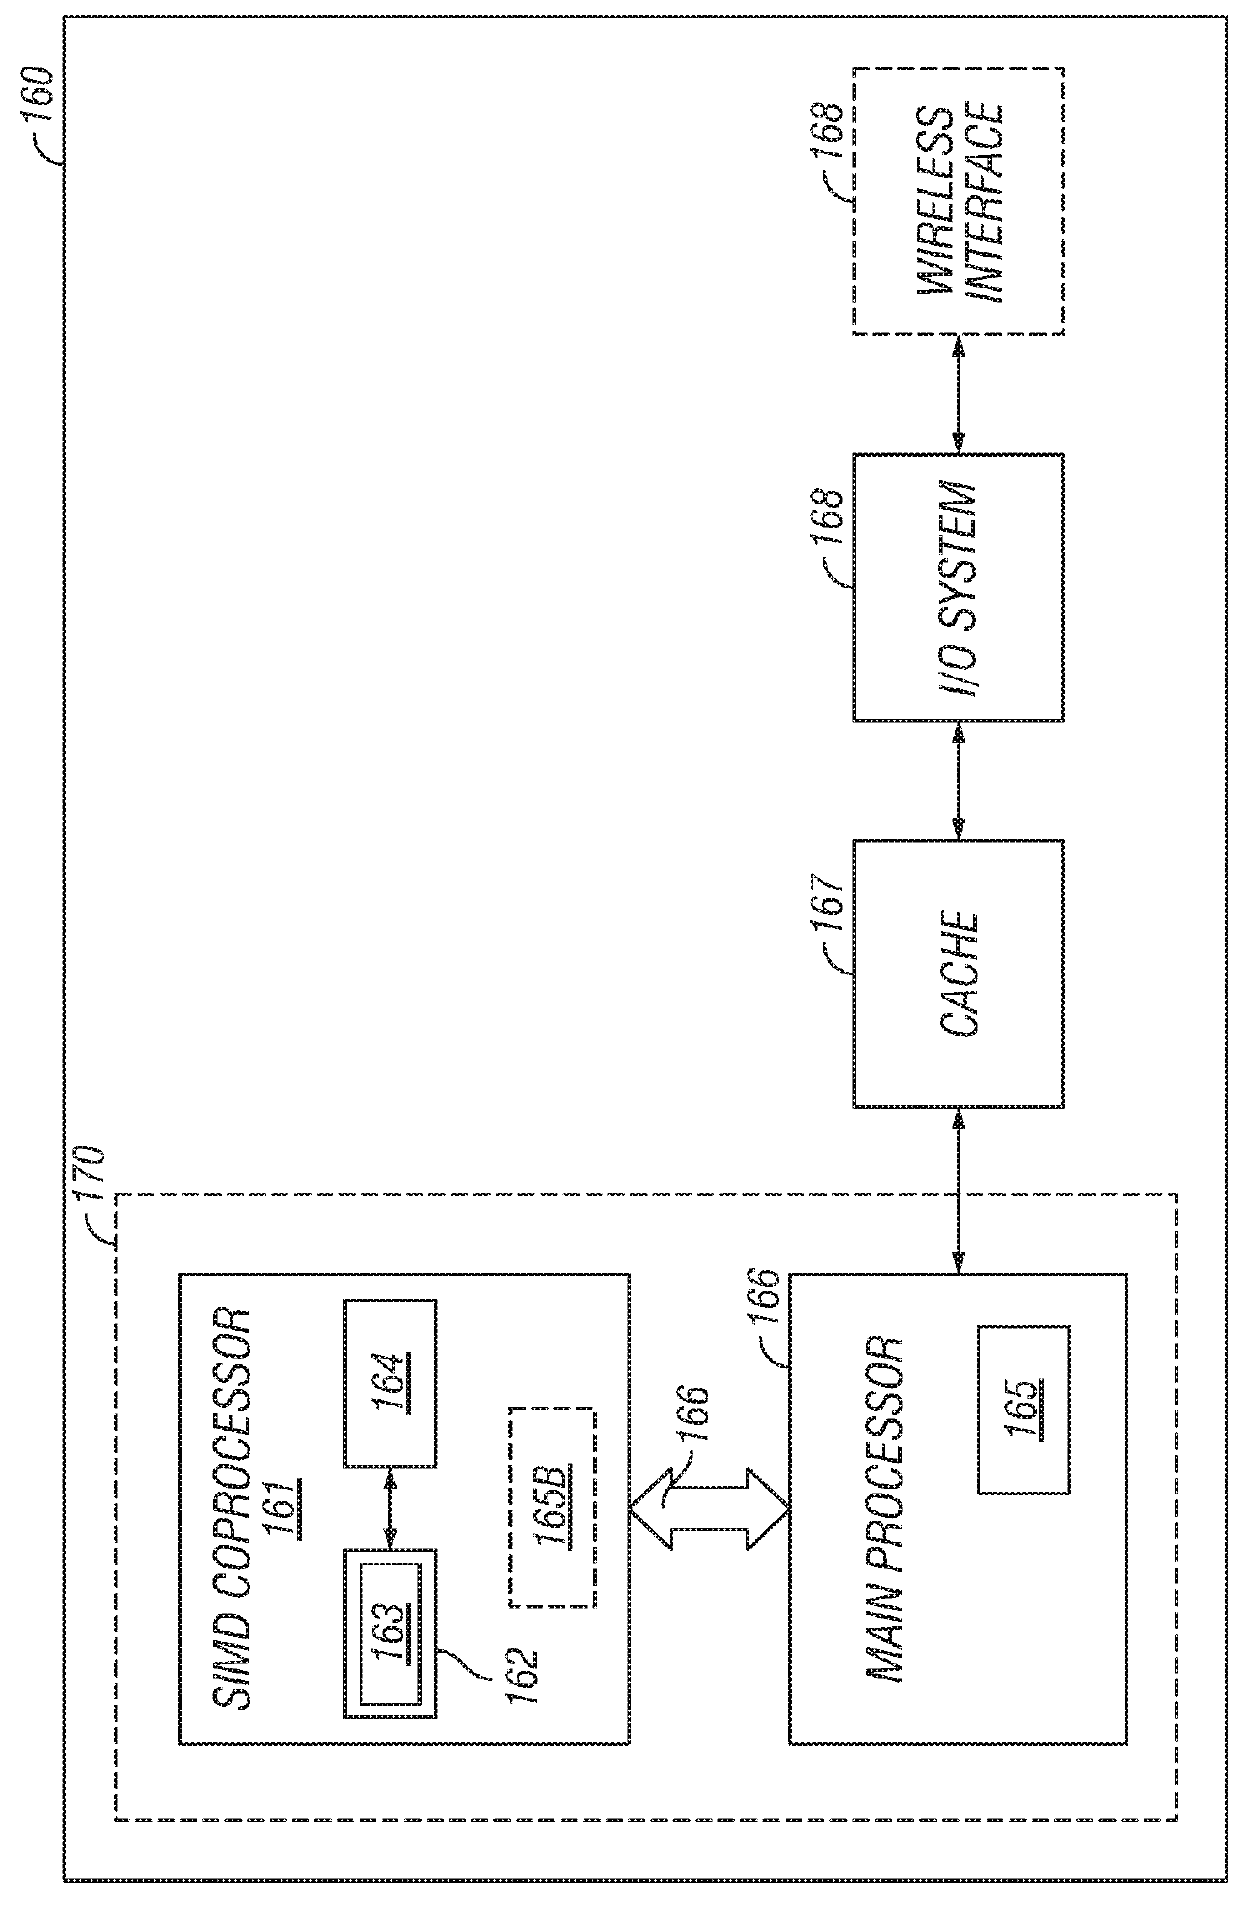 Reconfigurable test access port with finite state machine control